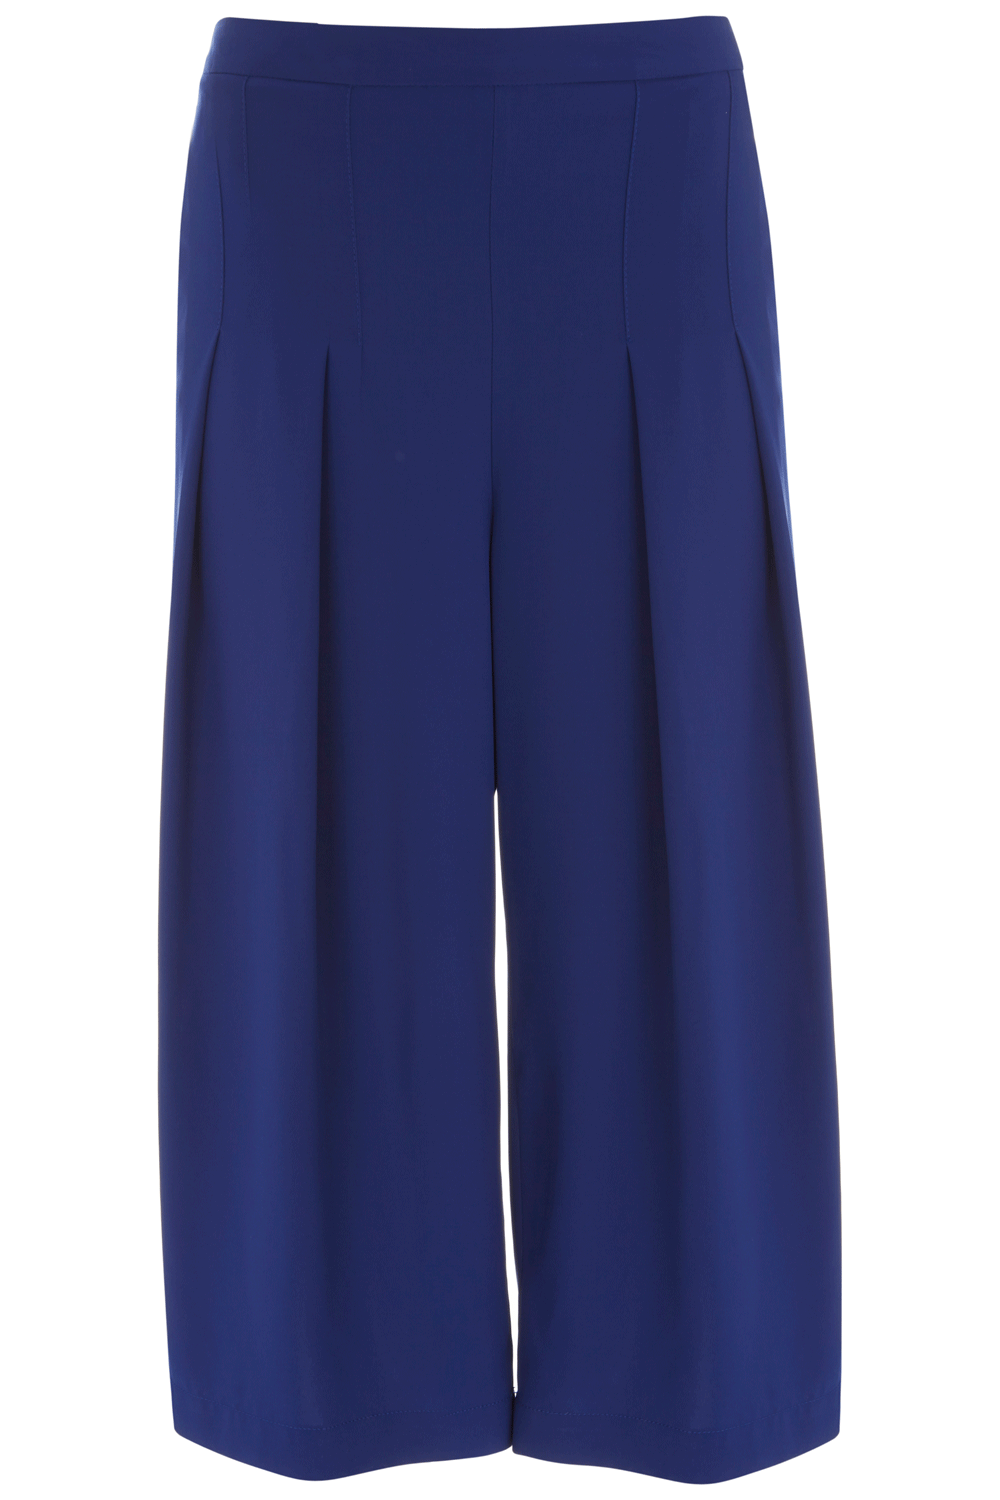 Pleated Trouser, £16